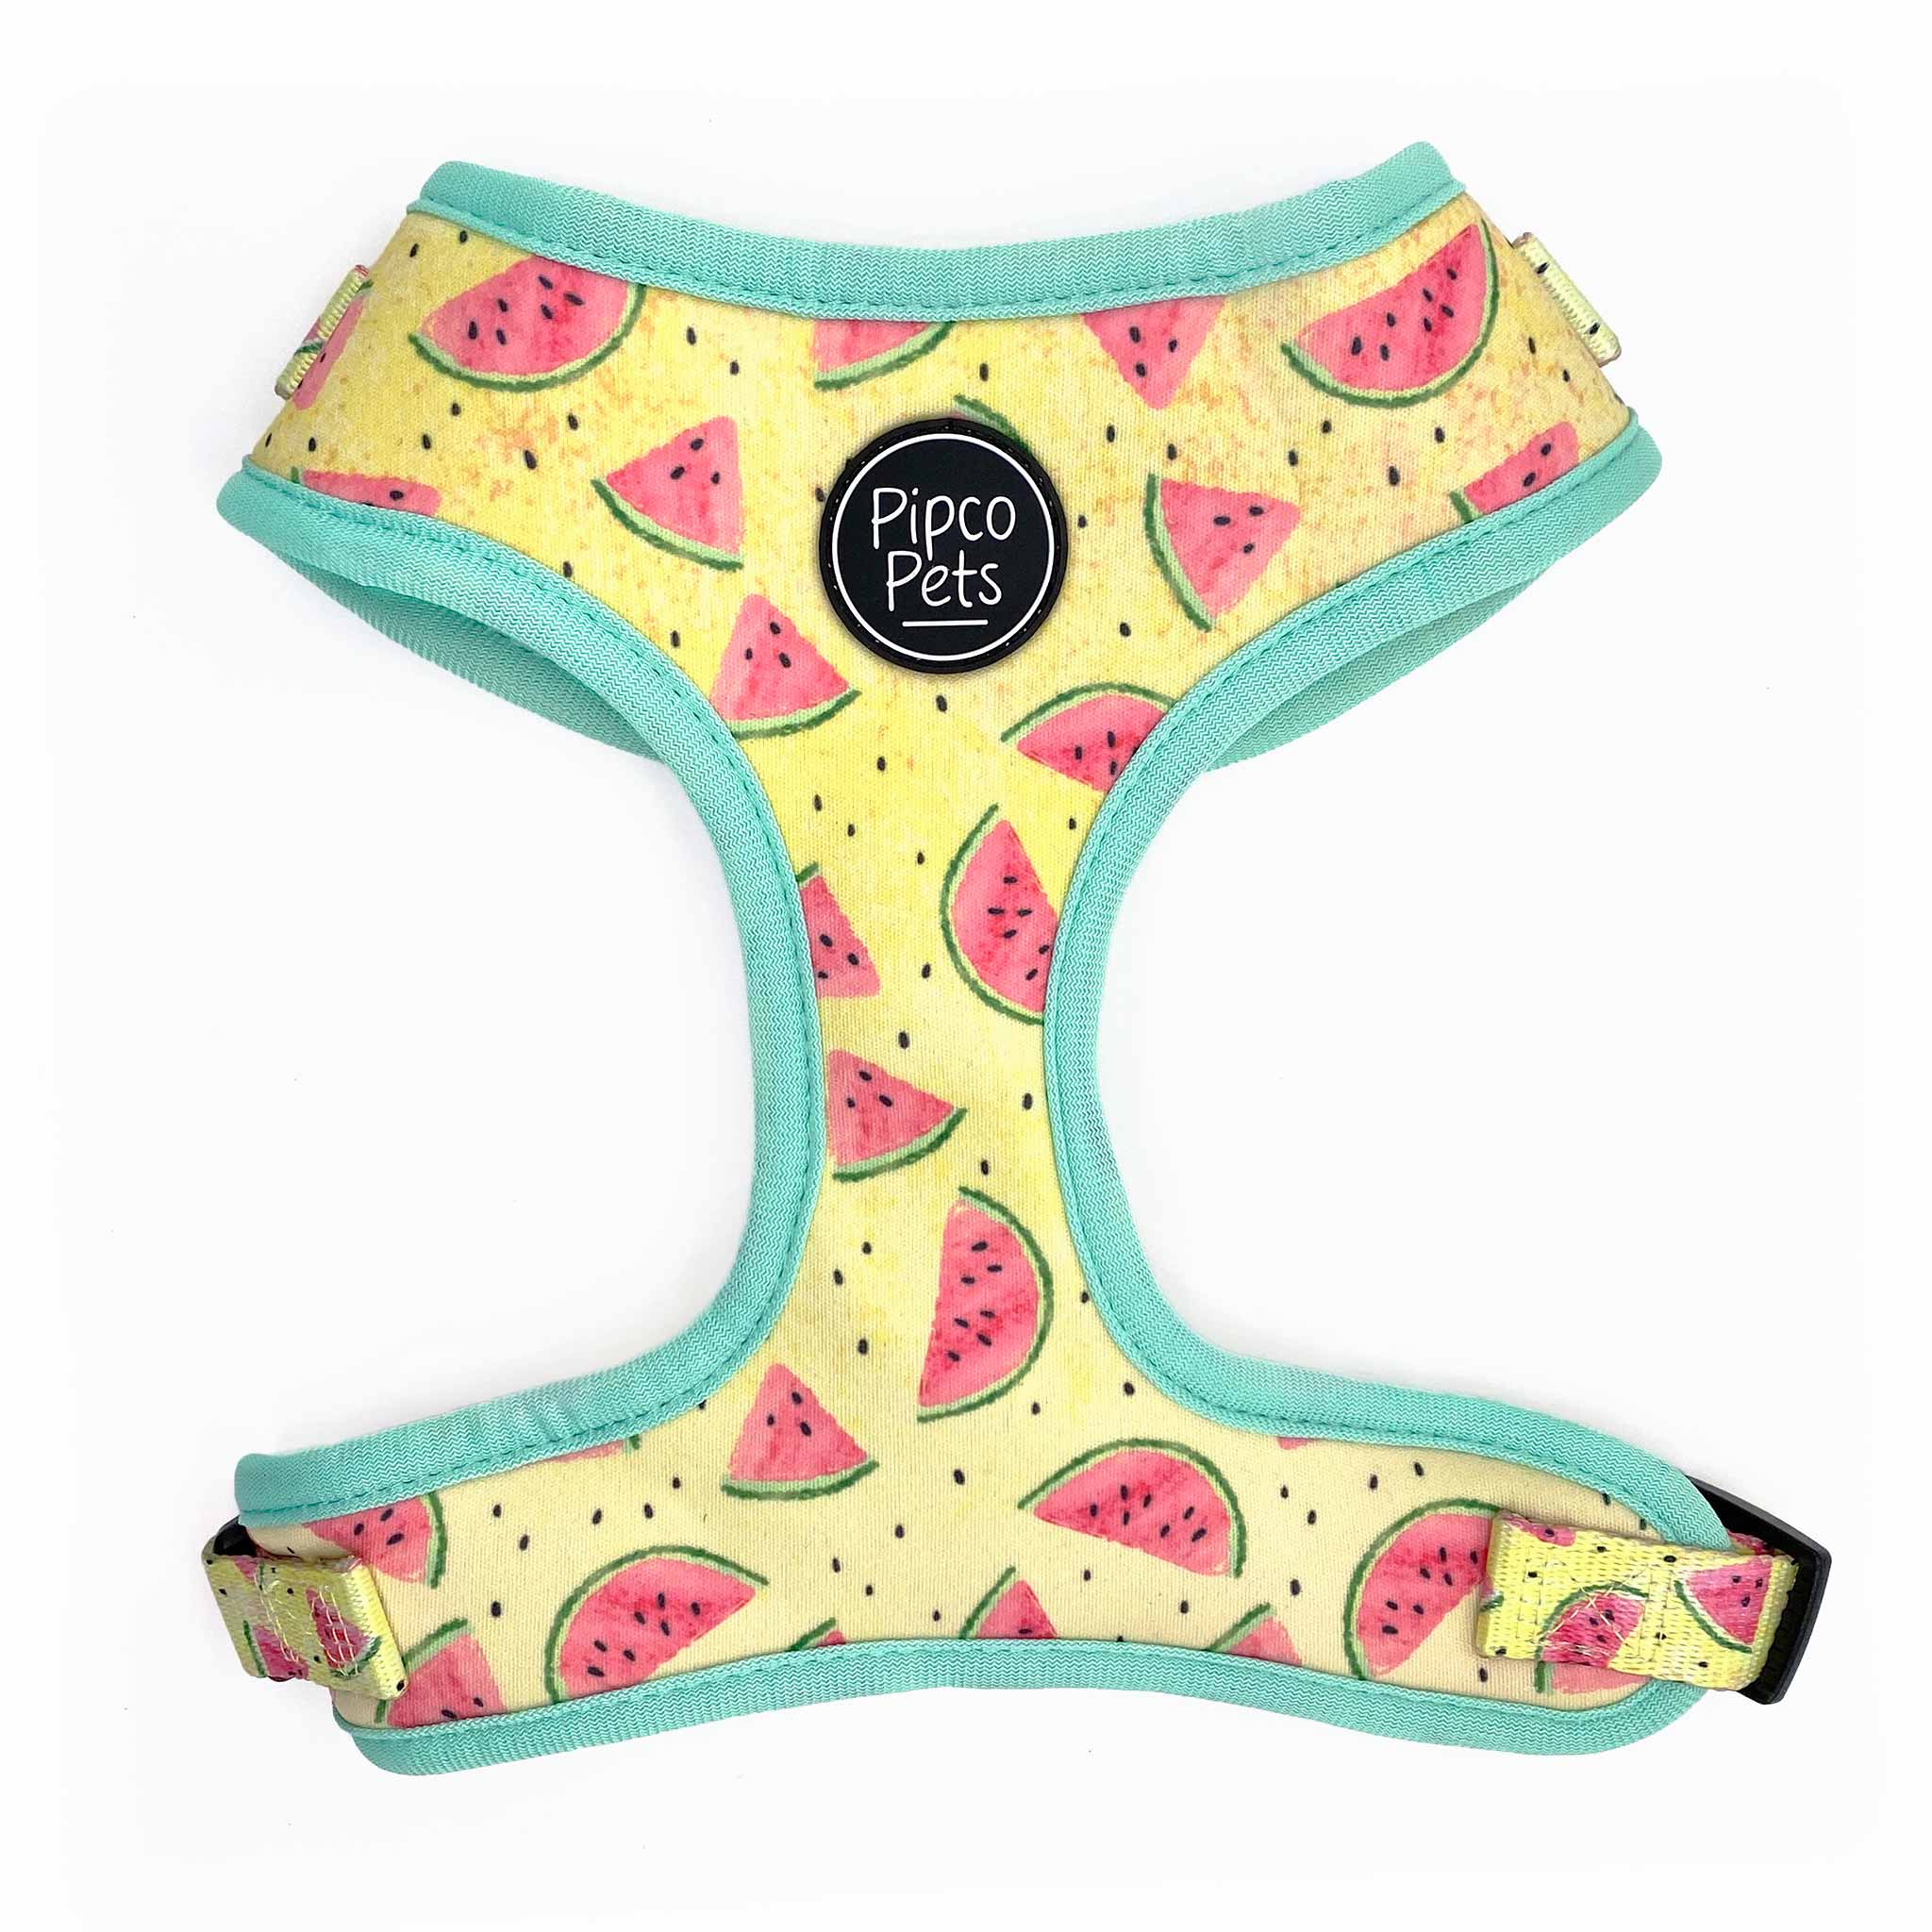 Front view of Pipco Pets adjustable dog harness with Summer Melons watermelon print pattern in yellow